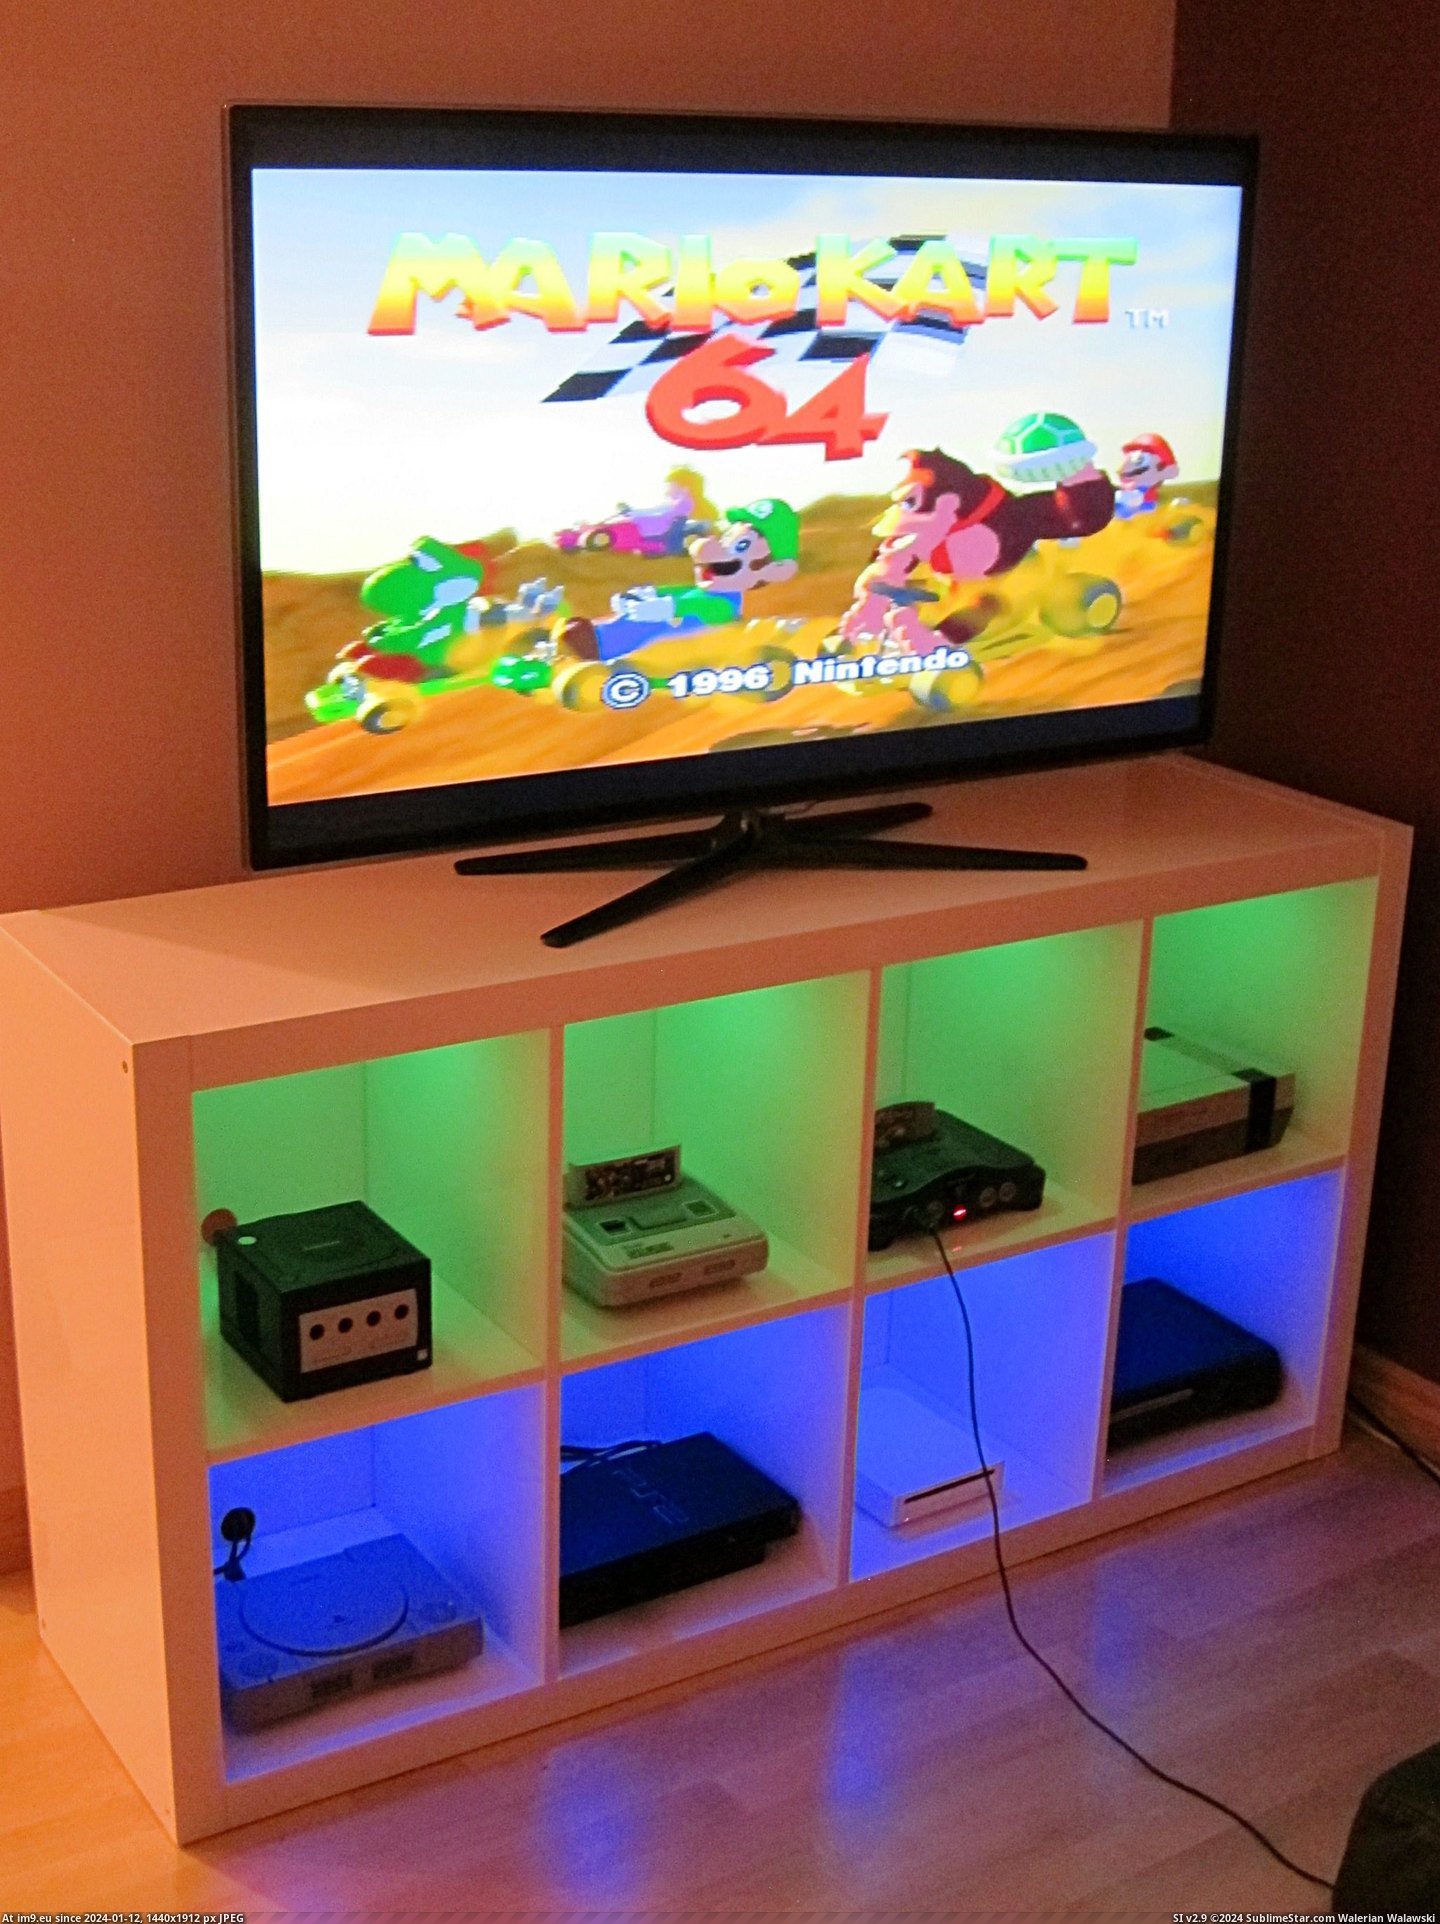 #Gaming #Happy #Finished #Product #Ikea #Bookshelf #Cabinet #Console #Modified [Gaming] I modified an Ikea bookshelf to make a console cabinet. Very happy with the finished product! Pic. (Bild von album My r/GAMING favs))